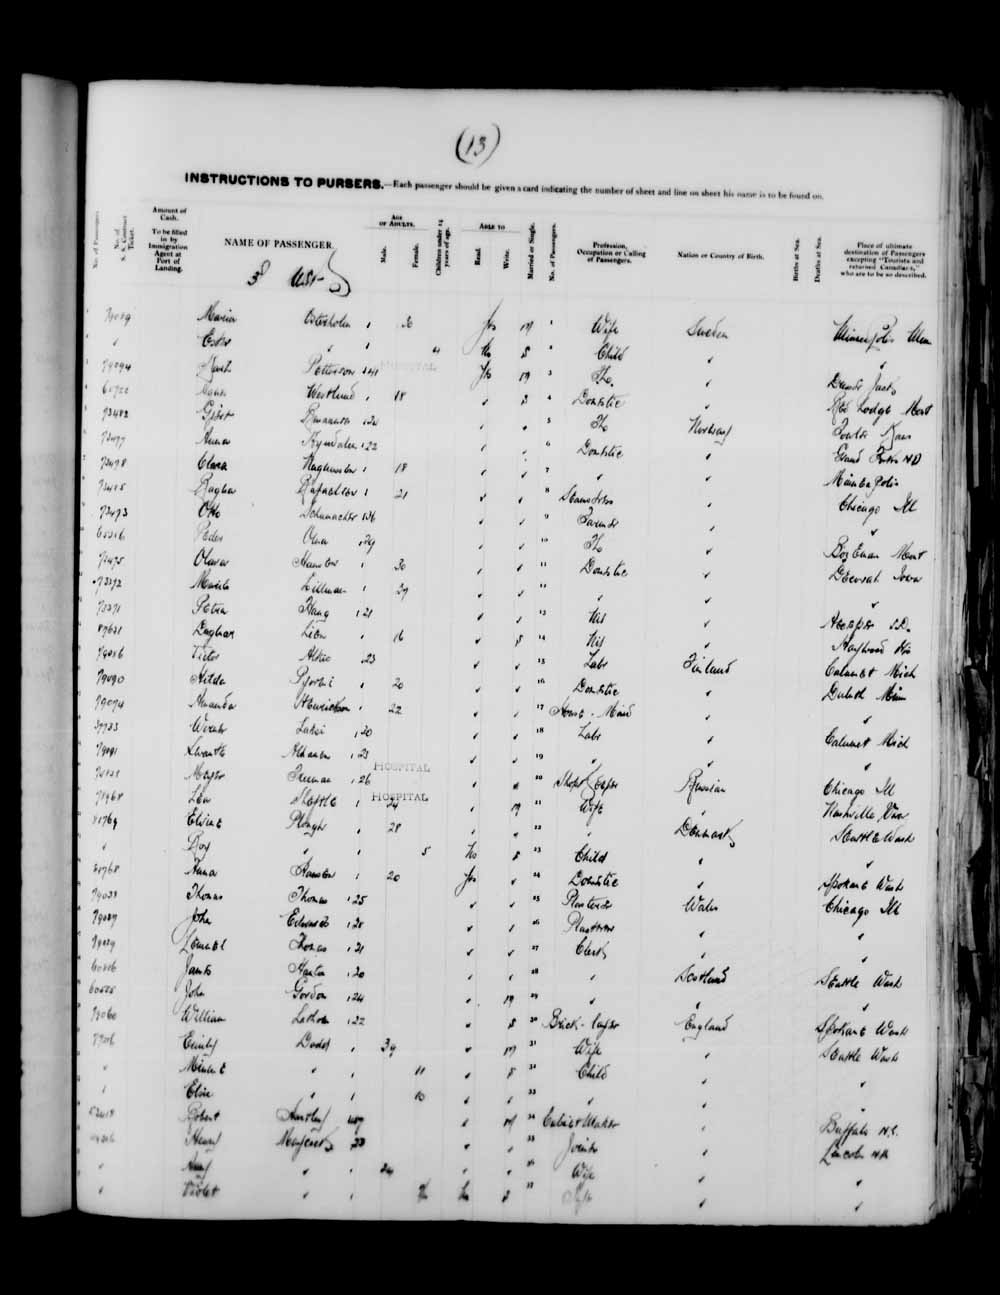 Digitized page of Quebec Passenger Lists for Image No.: e003591584